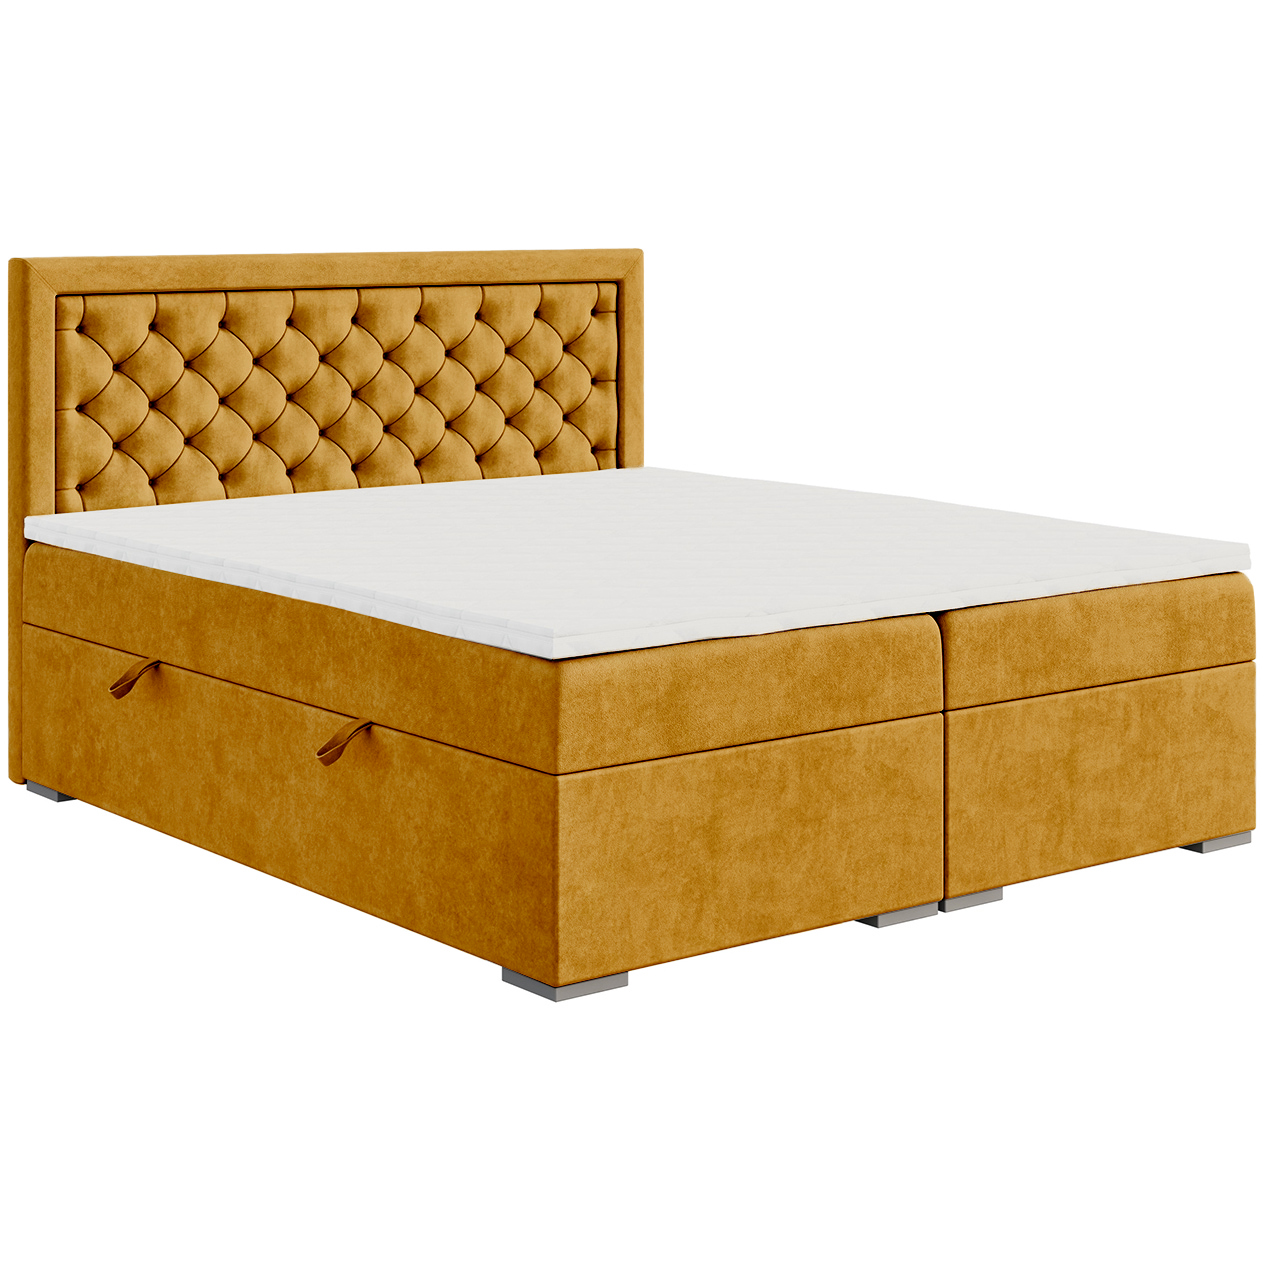 Upholstered bed BLUM 160x200 riviera 41